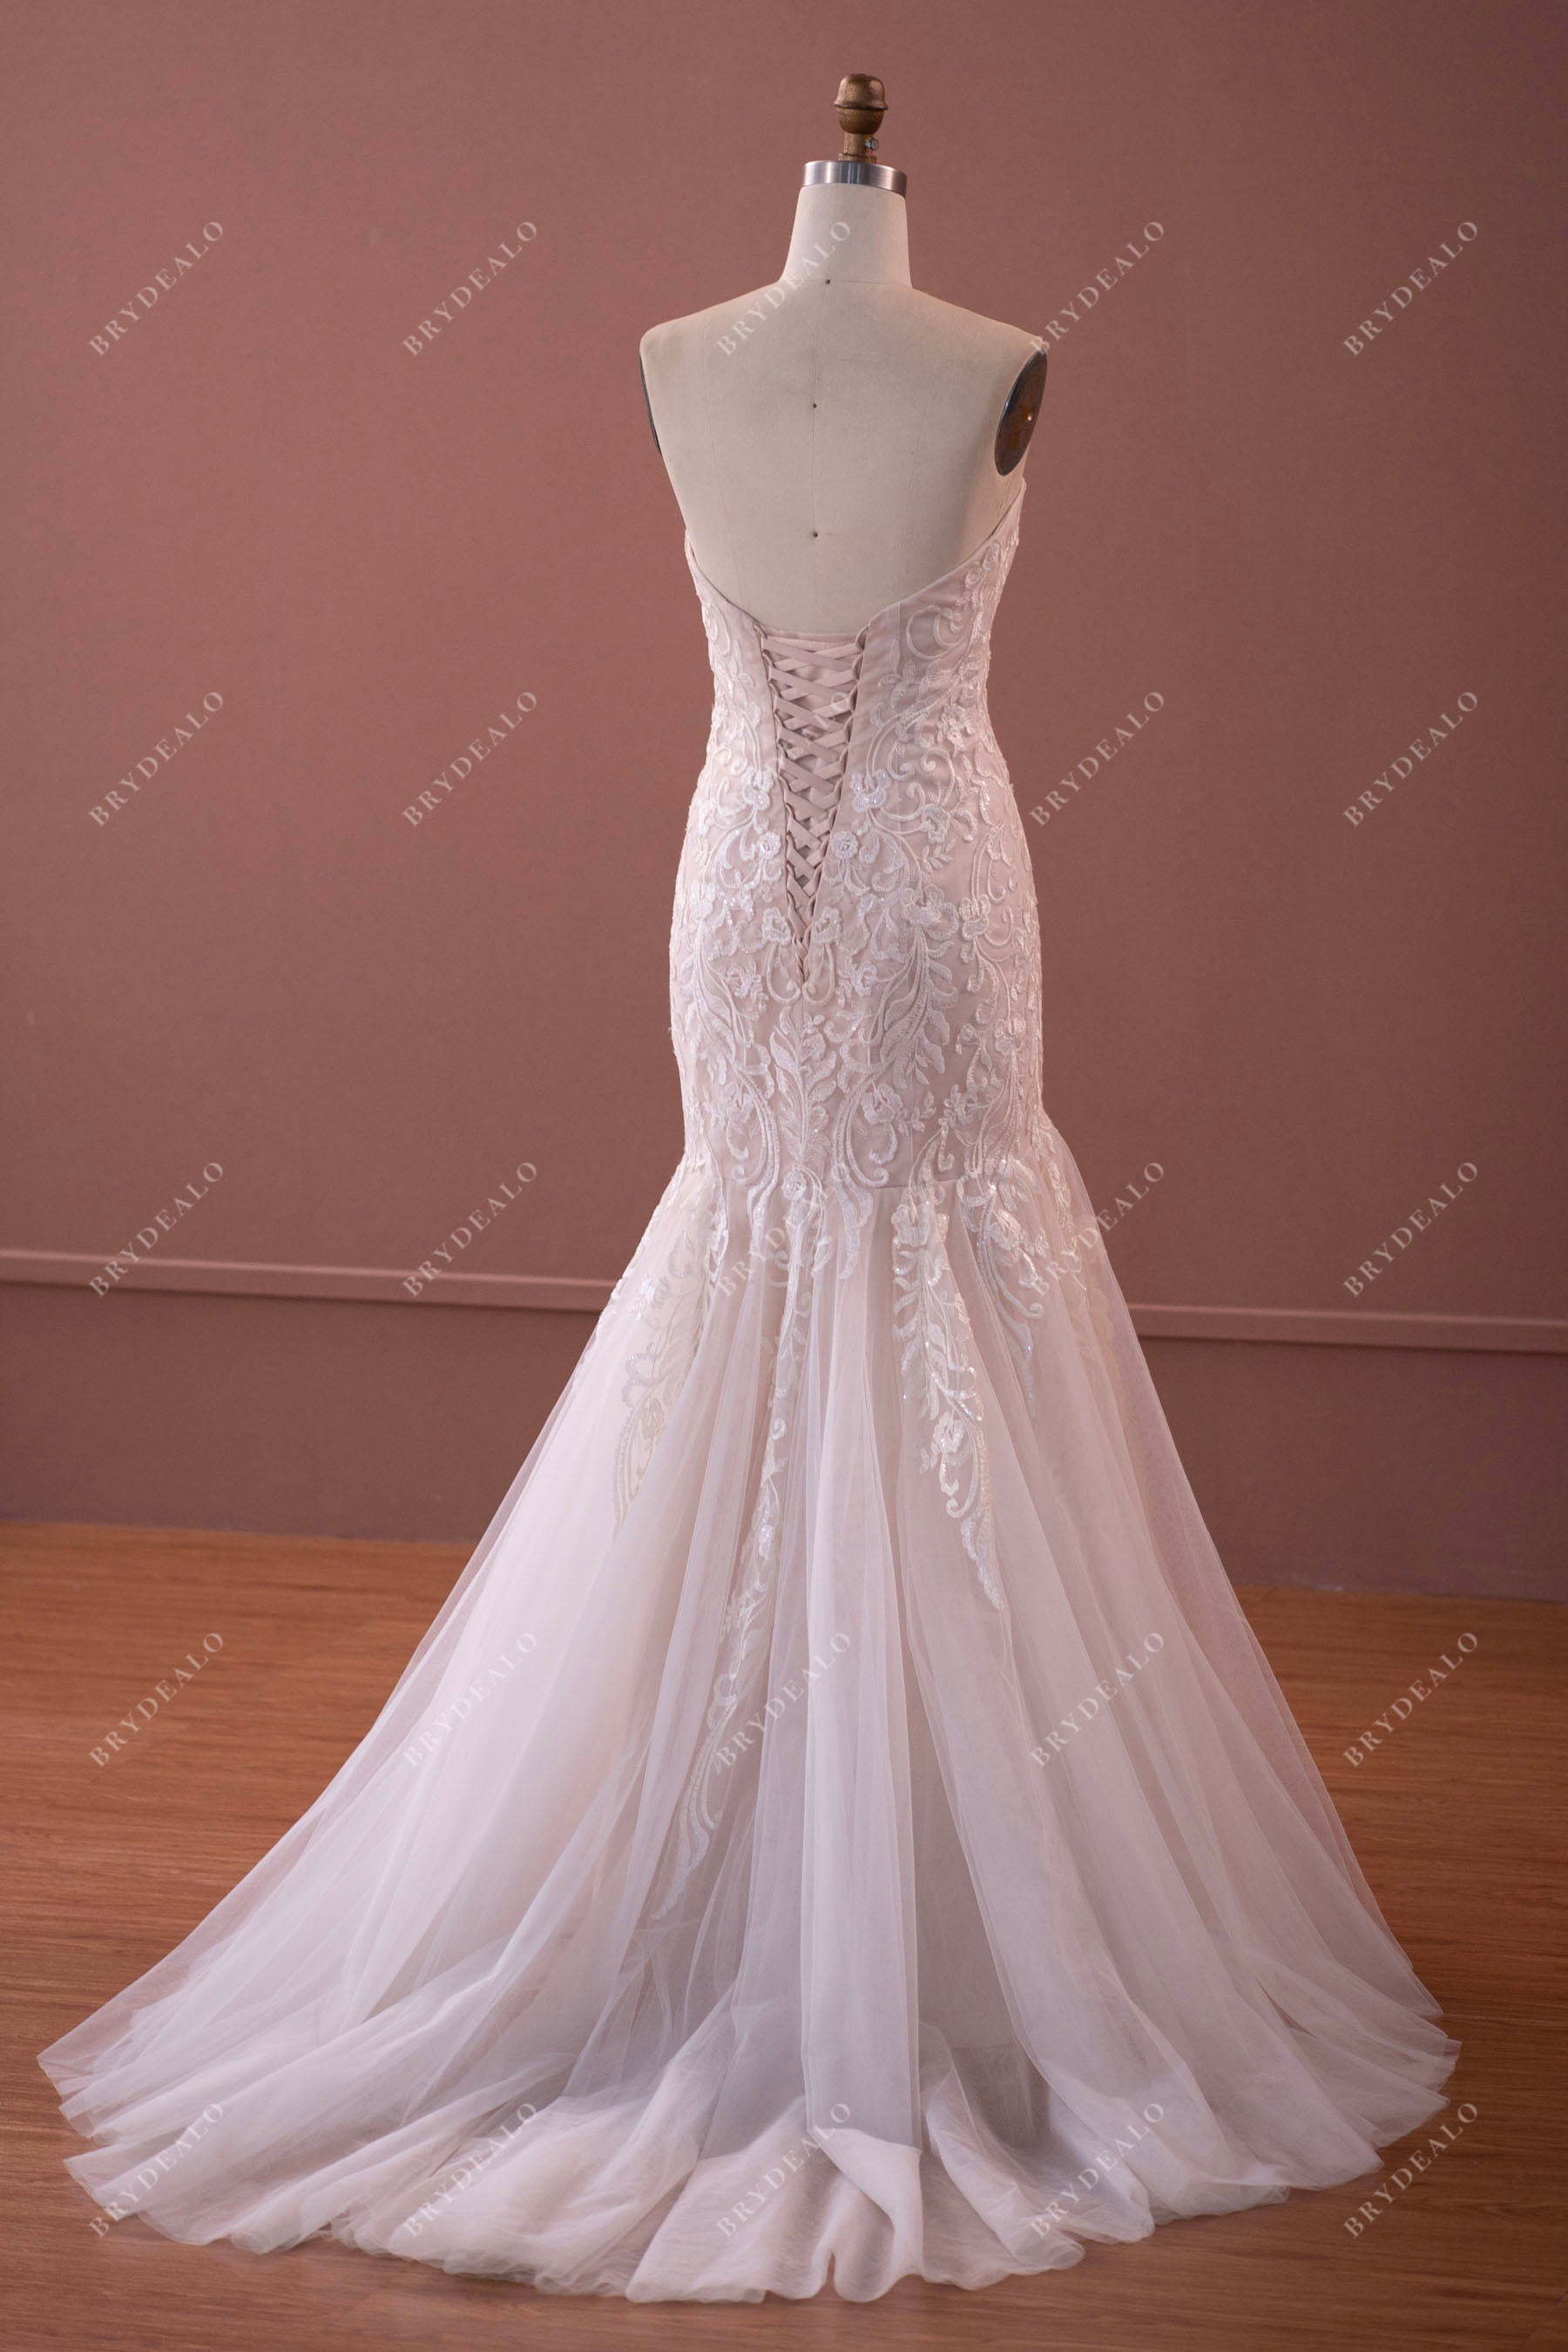 wholesale strapless mermaid wedding dress sample with lace up back